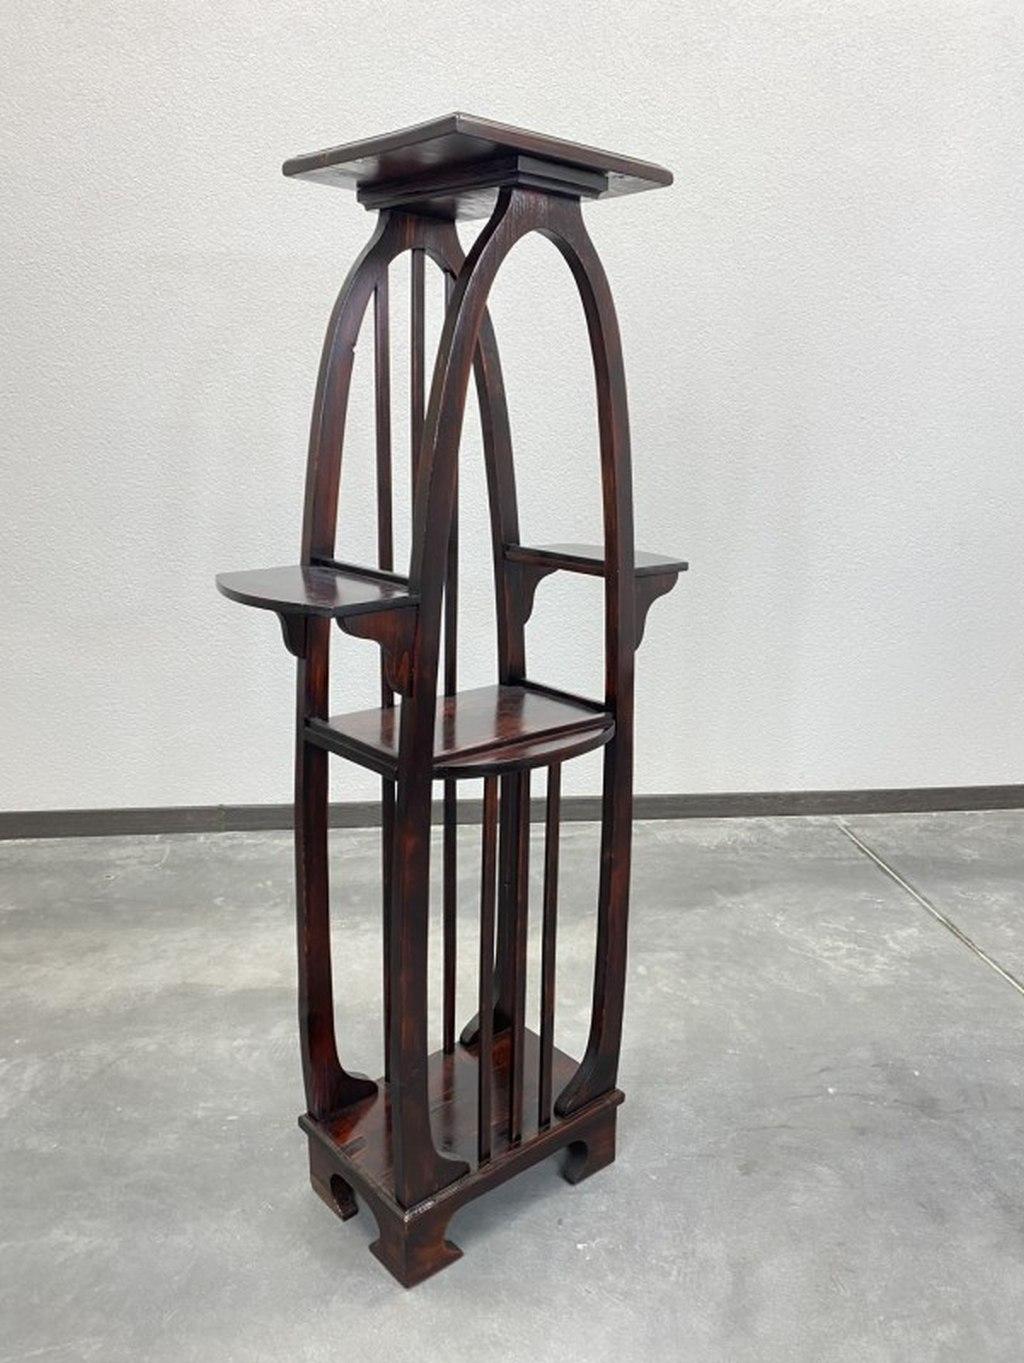 Jugendstil plant stand professionally stained and repolished.